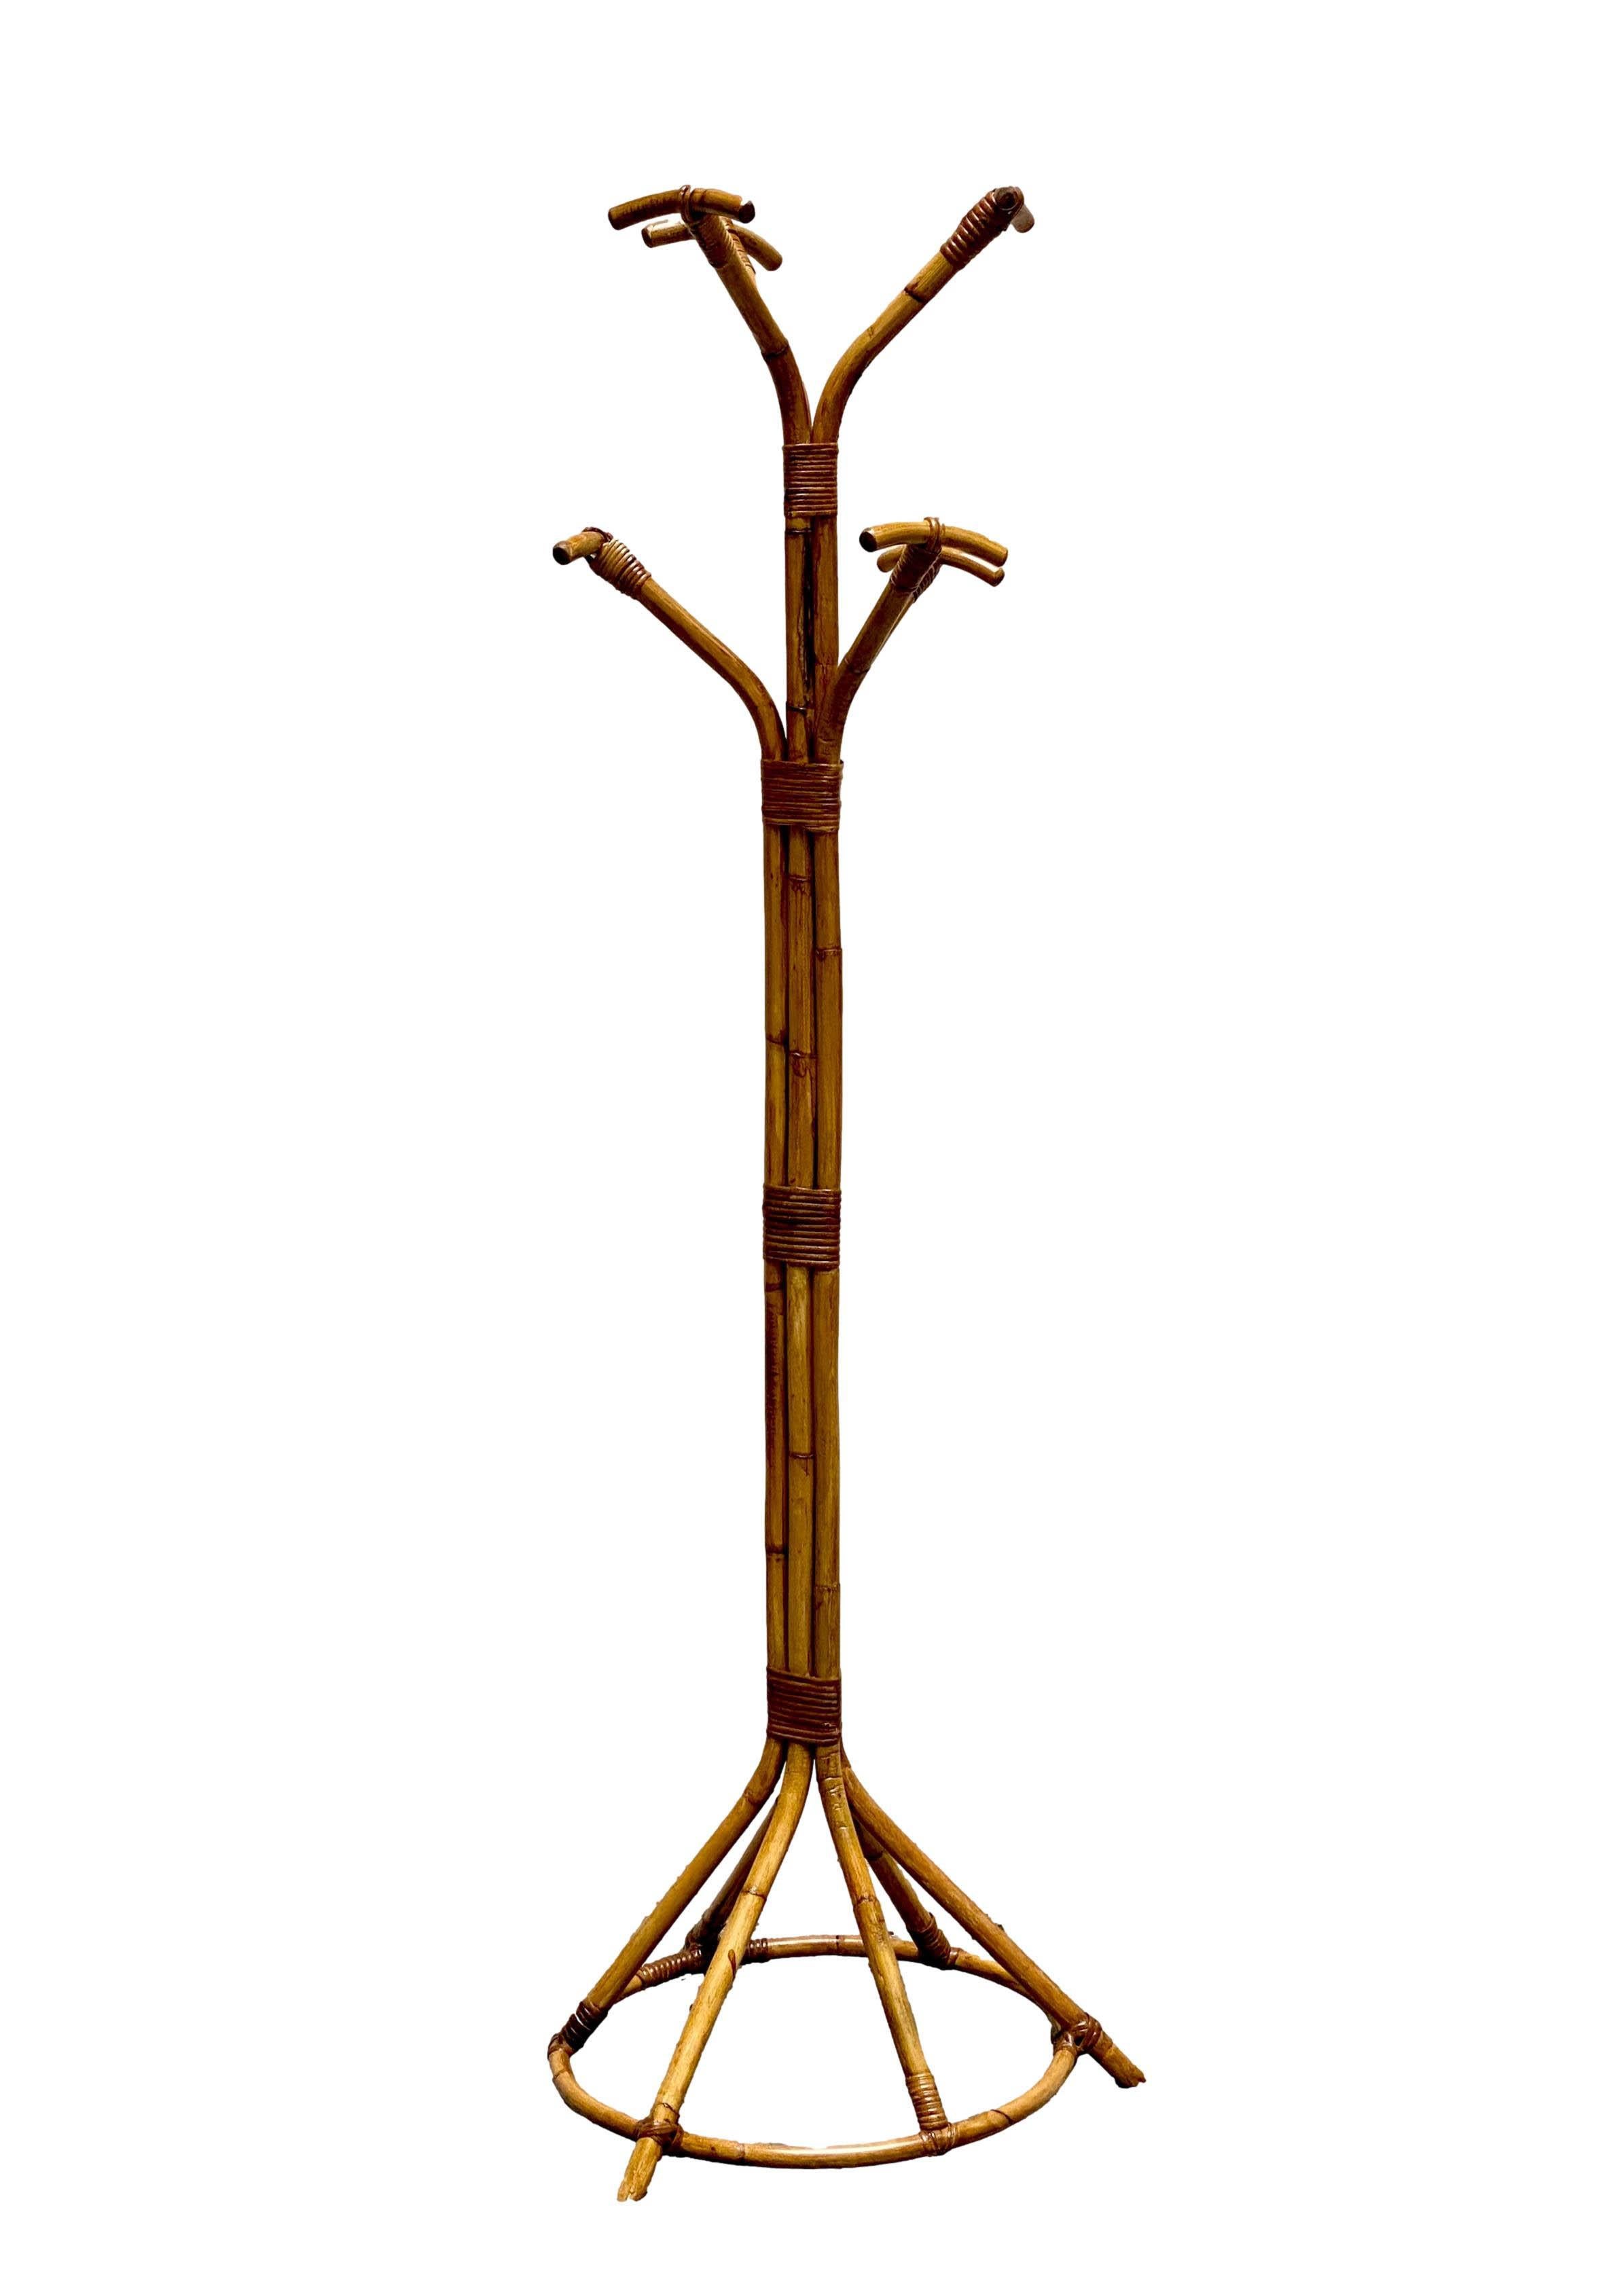 Continental bamboo coat stand in the manner of Vittorio Bonacina, dating from the mid-20th century, around 1960. The bamboo has a nice colour and shows a desirable aged patina.
Pleasantly made bamboo stand.
Raised on four spread legs joined by a